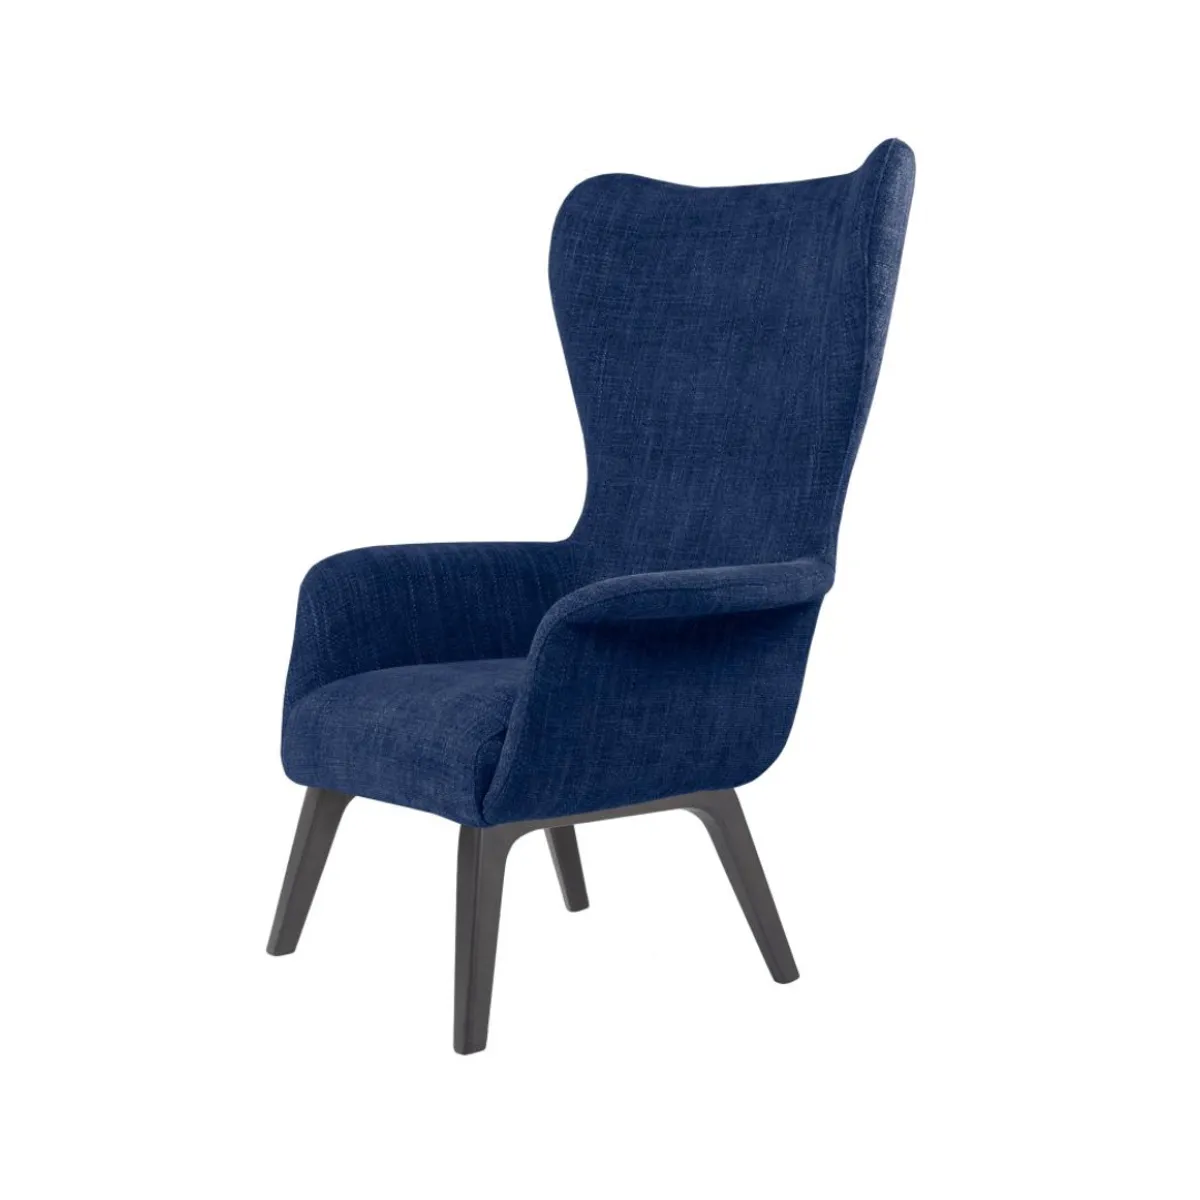 Avery wing back chair 1